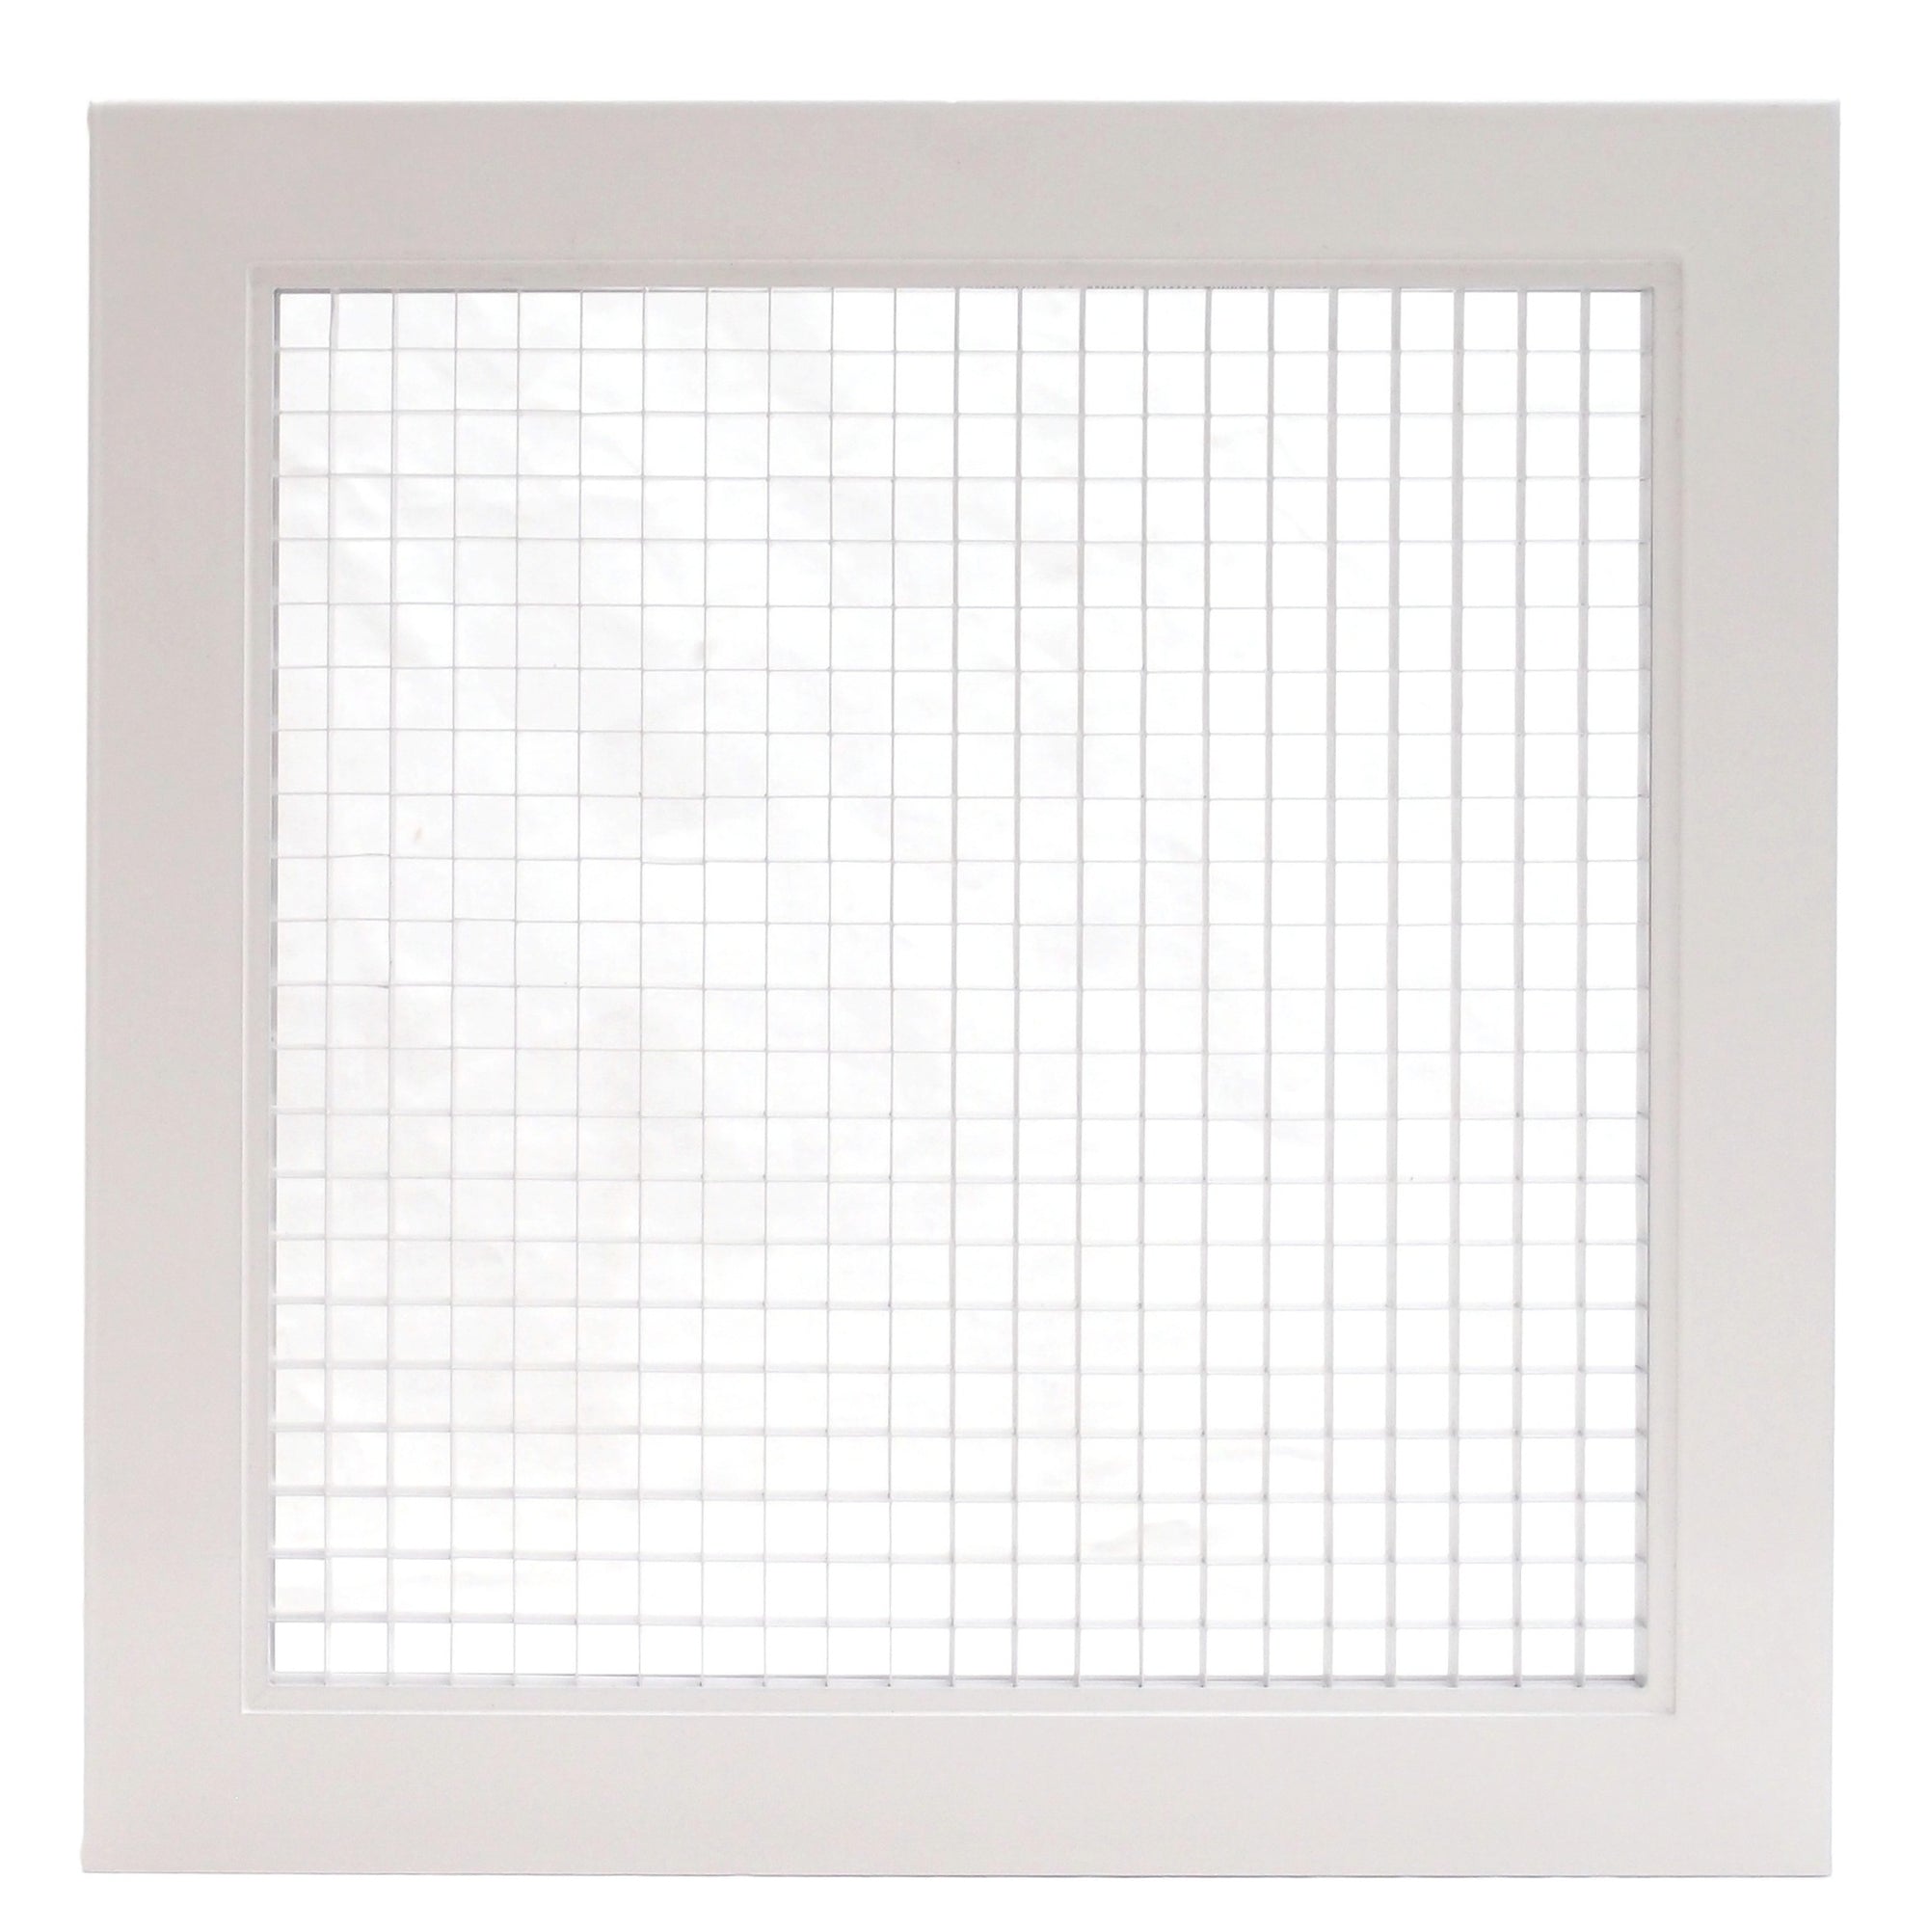 36" x 8" Cube Core Eggcrate Return Air Filter Grille for 1" Filter